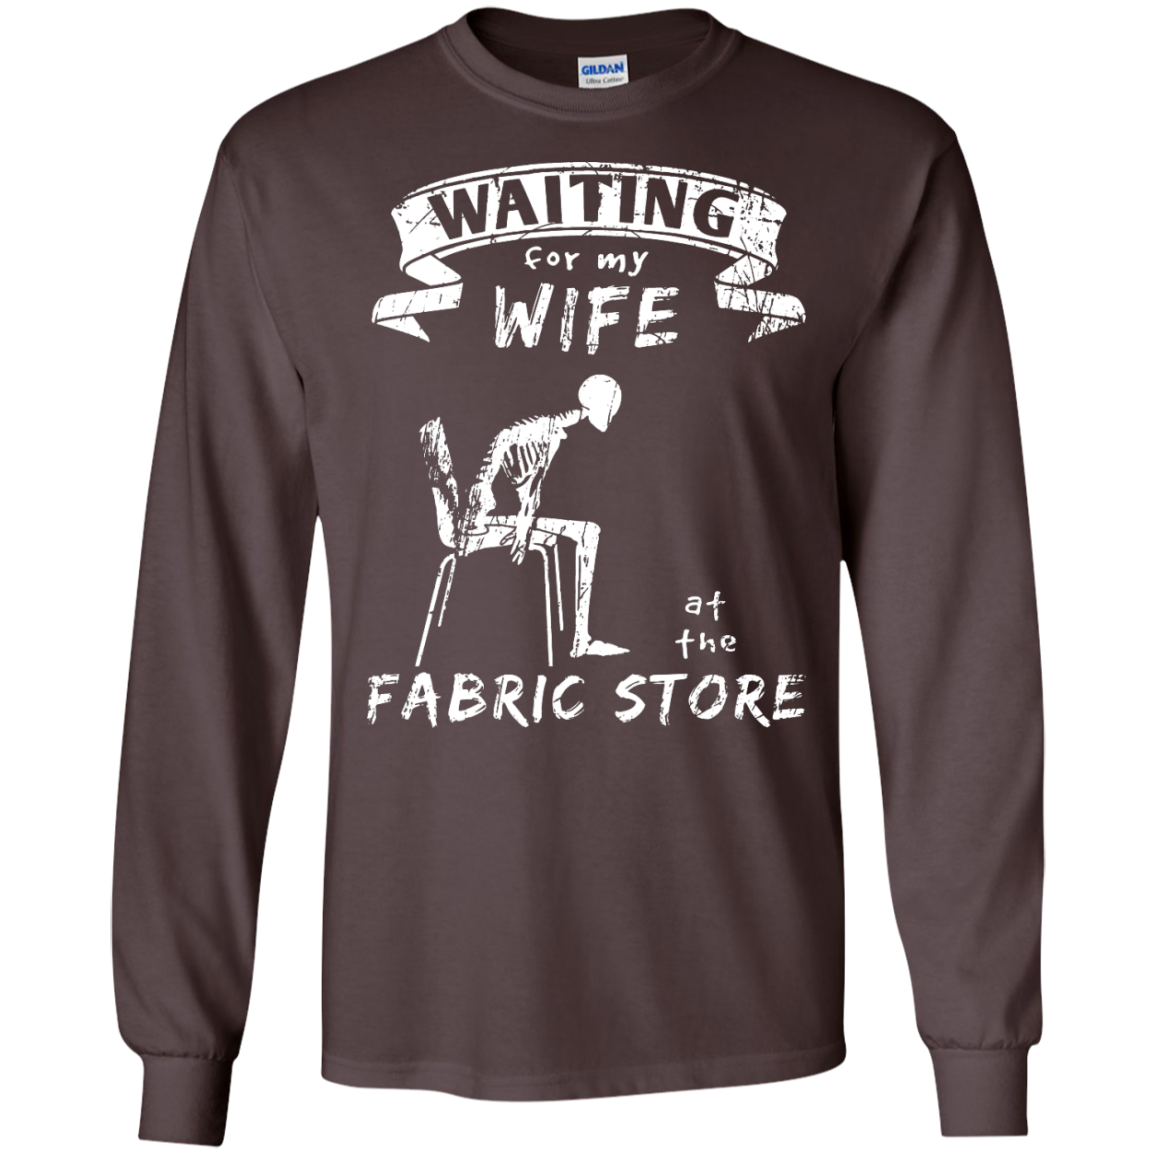 Waiting at the Fabric Store Long Sleeve T-Shirts - Crafter4Life - 3